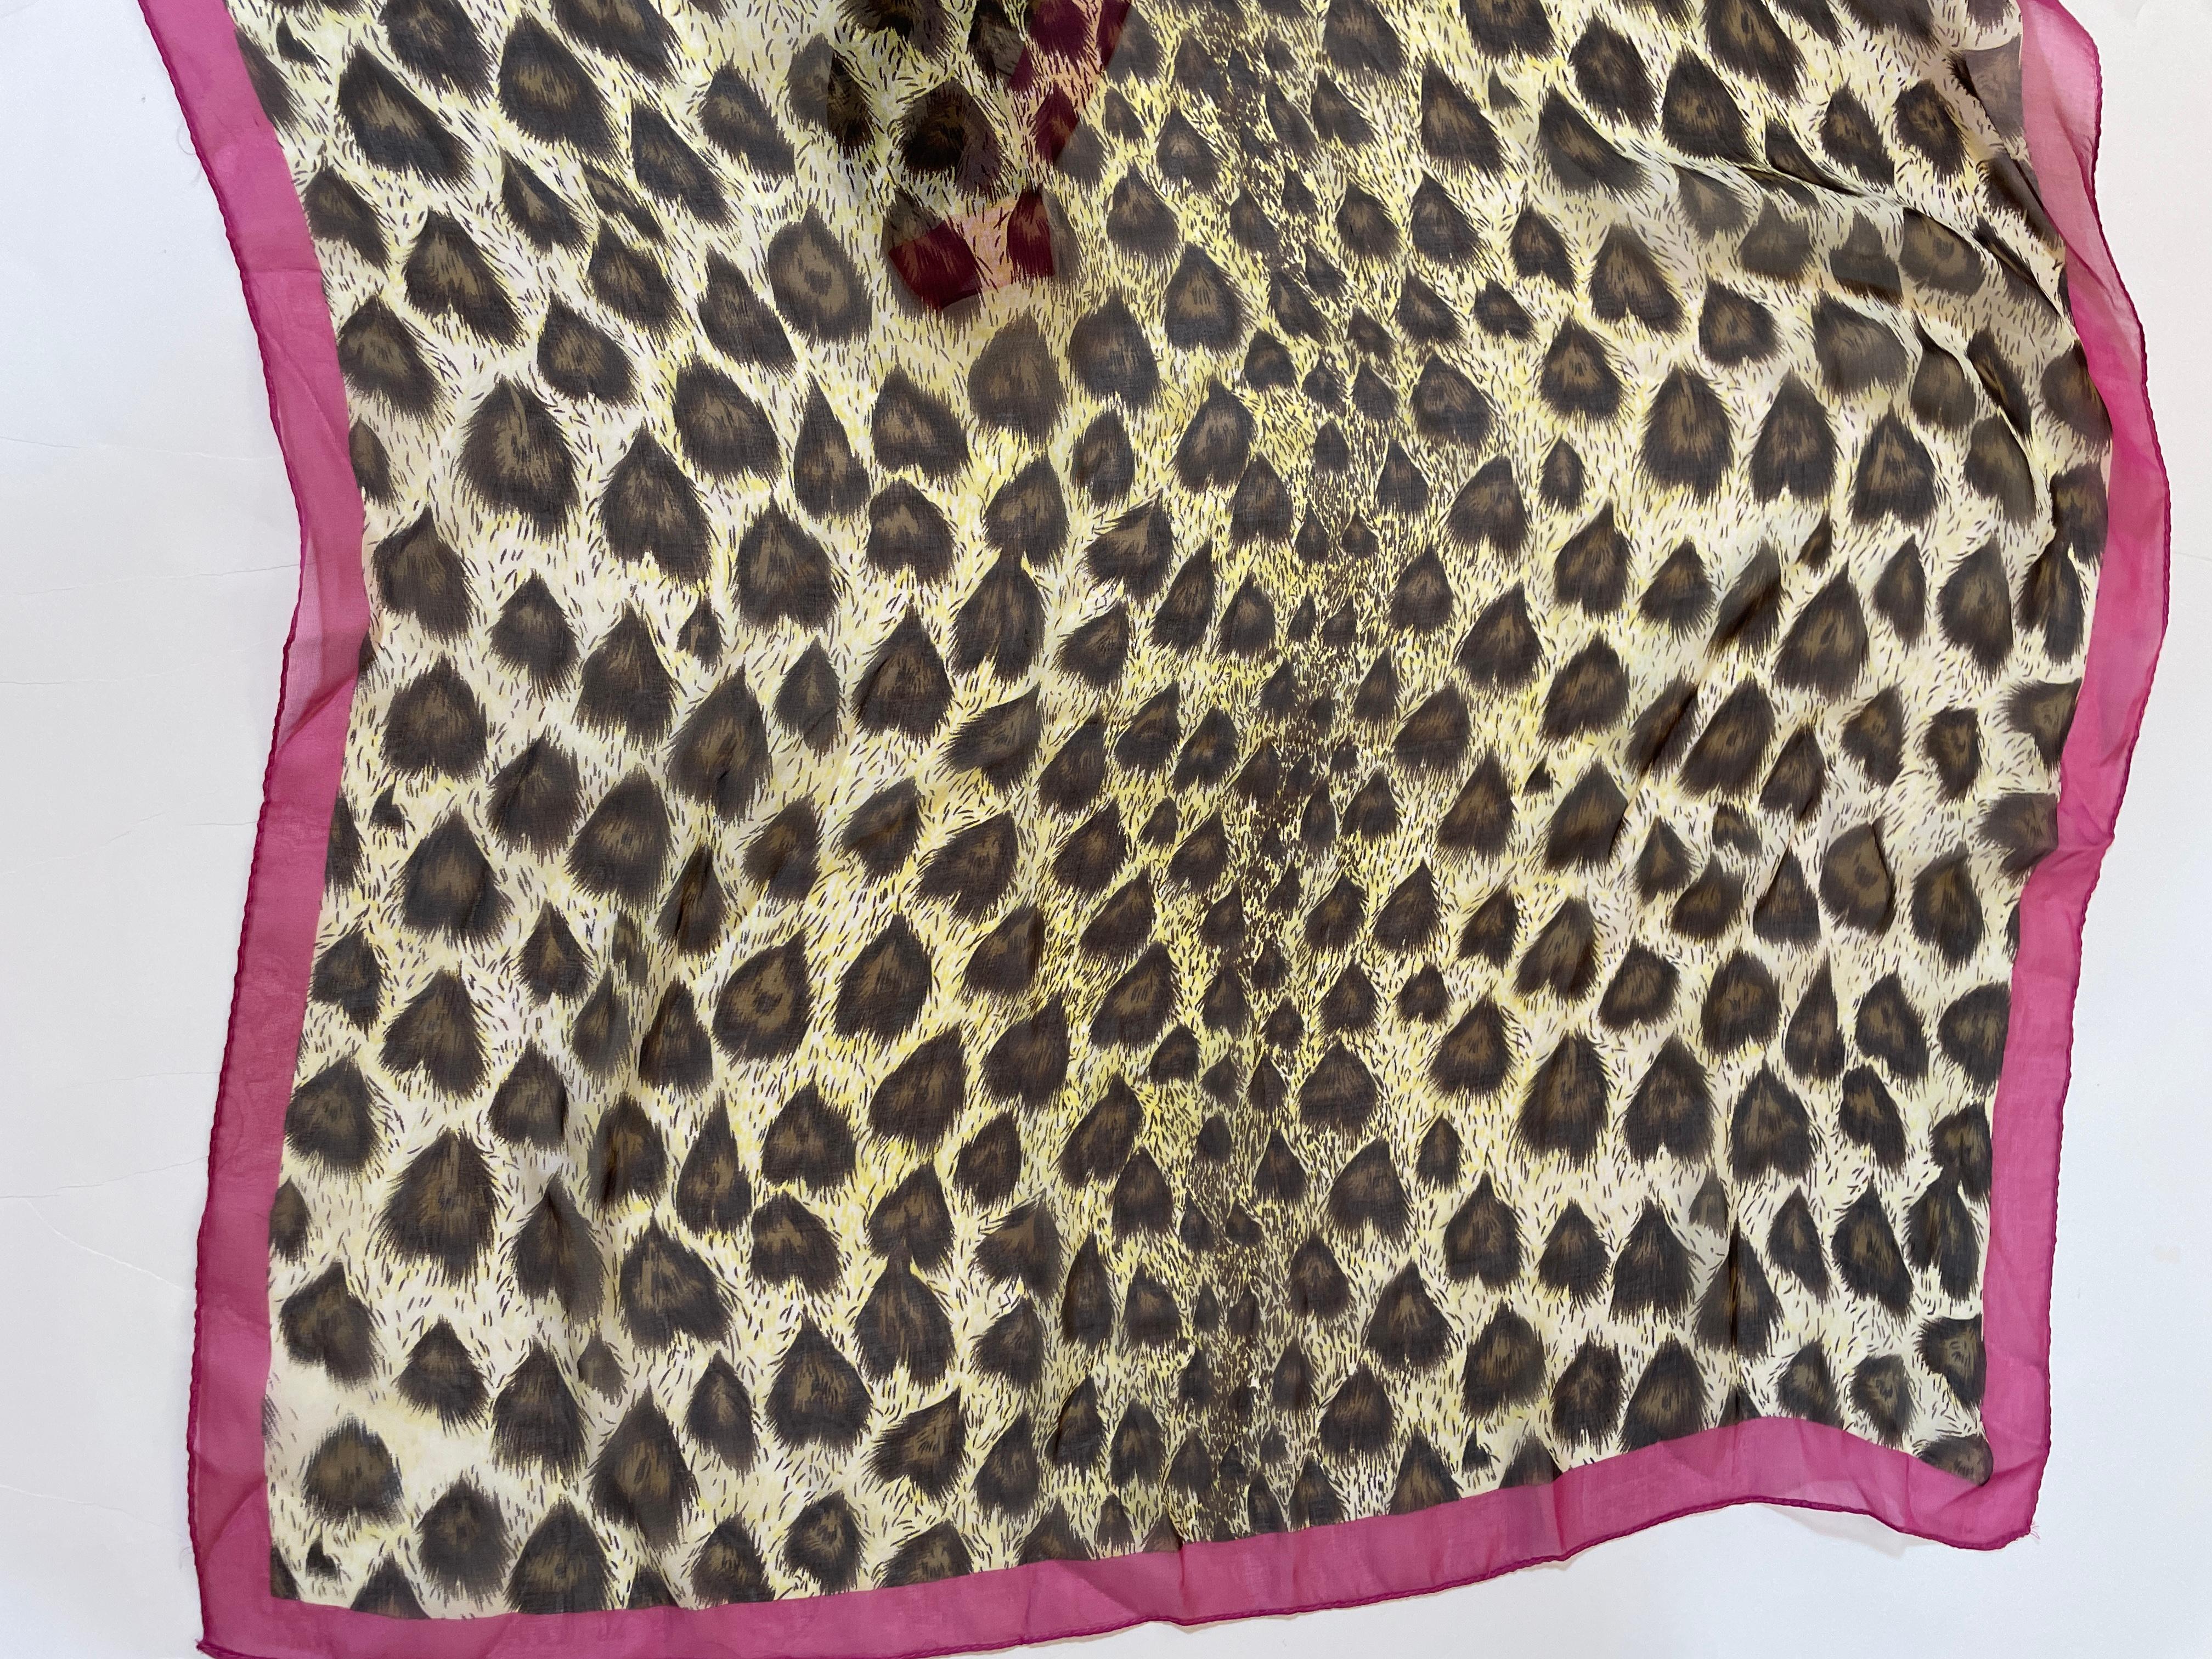 Moschino Animal Print Silk Scarf Made In Italy Pink And Brown 1990s Head Wrap For Sale 9